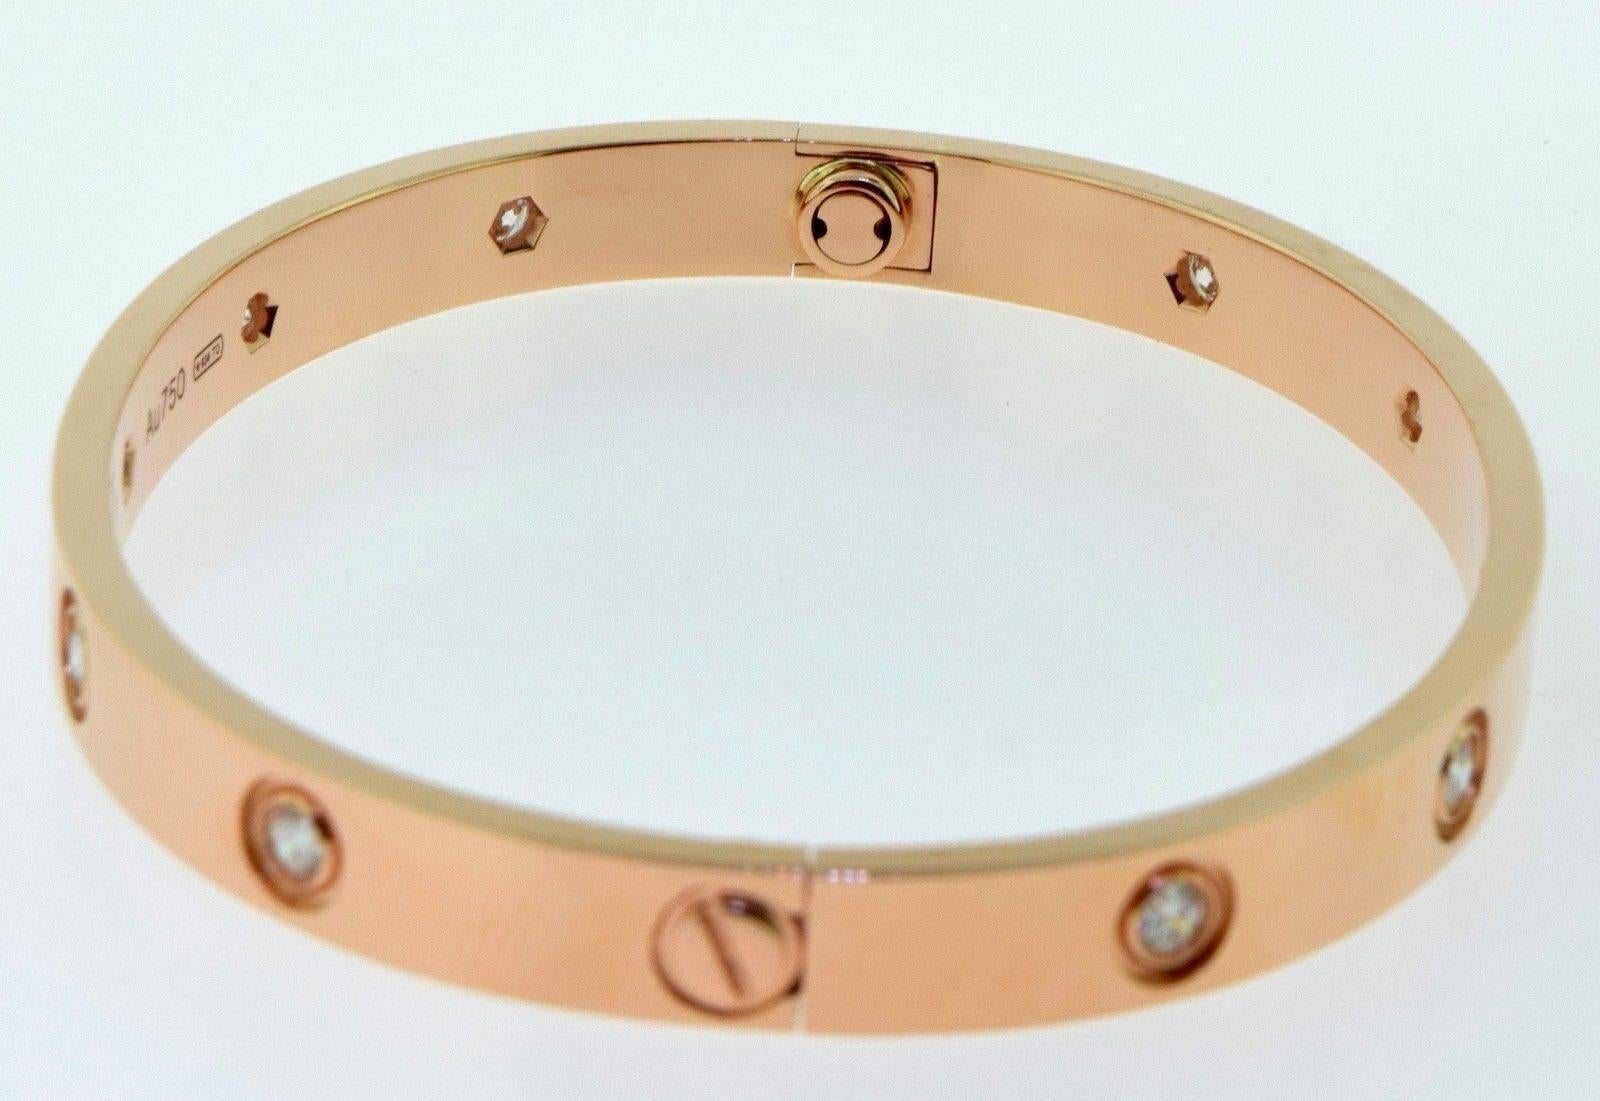 Cartier Rose Gold 10 Diamonds LOVE Bracelet Size 17 In Excellent Condition For Sale In Miami, FL